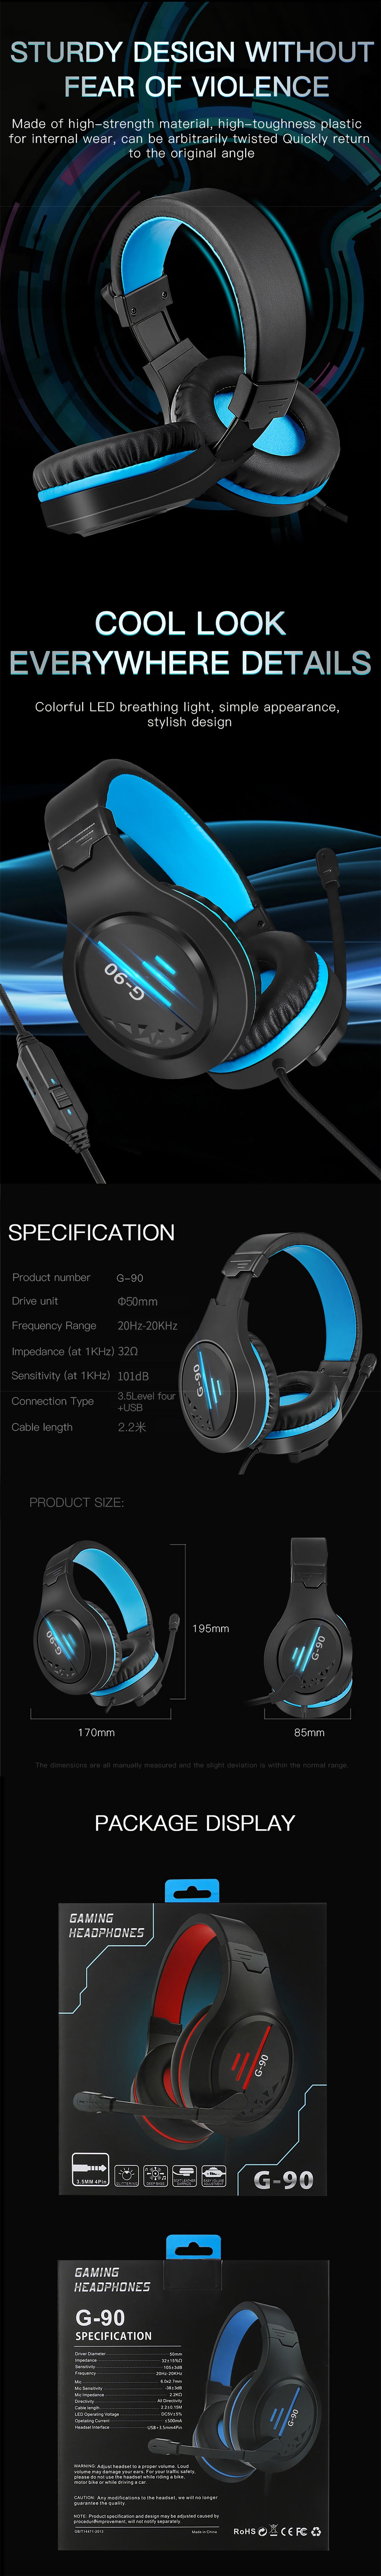 G90-Gaming-Headset-USB-35mm-Wired-Bass-Gaming-Headphone-Stereo-Video-Audio-Headphones-Earphone-with--1676266